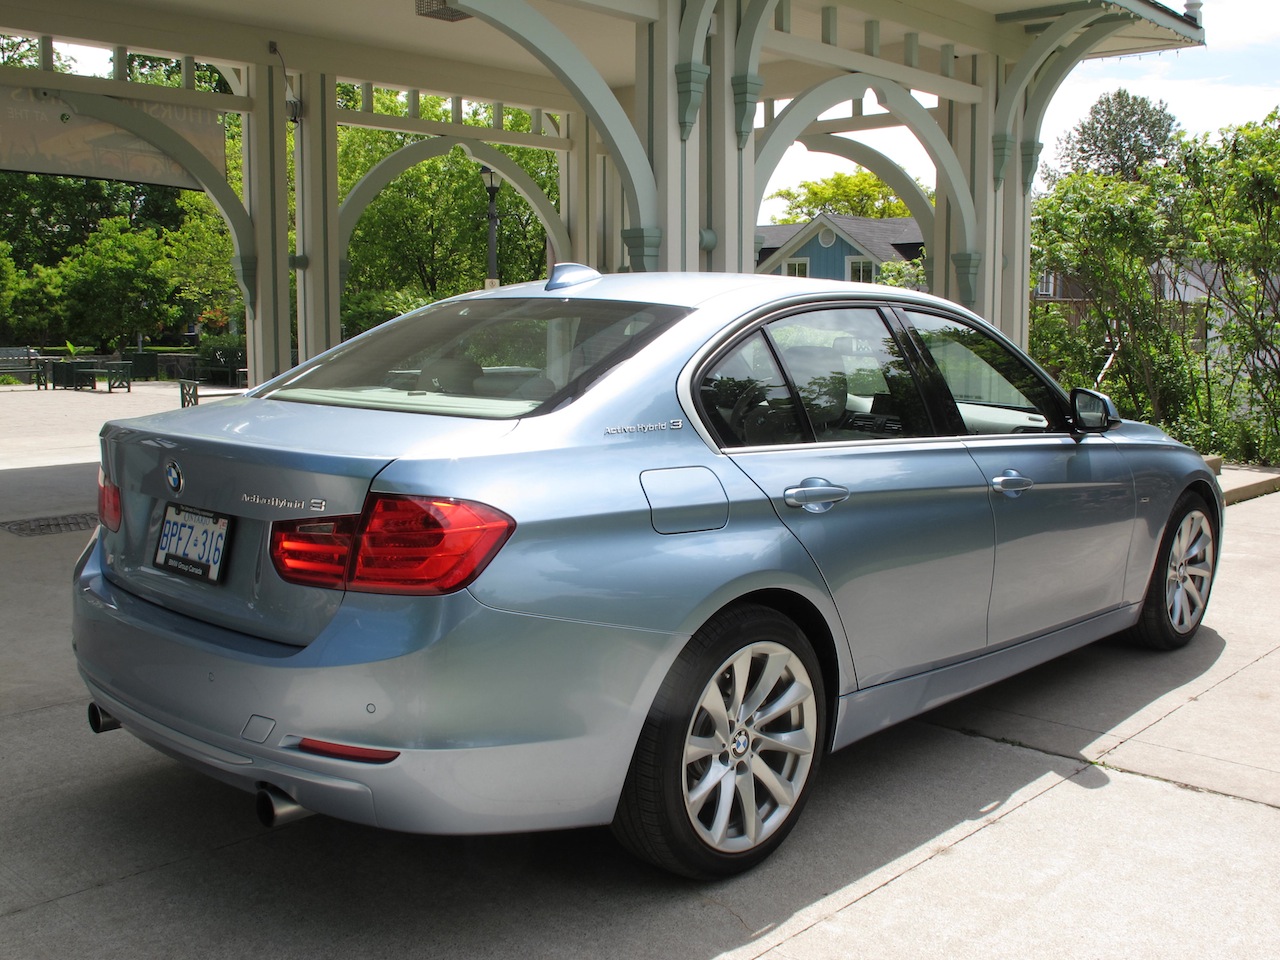 2013 BMW Activehybrid 3 Review - Cars, Photos, Test Drives, and Reviews |  Canadian Auto Review